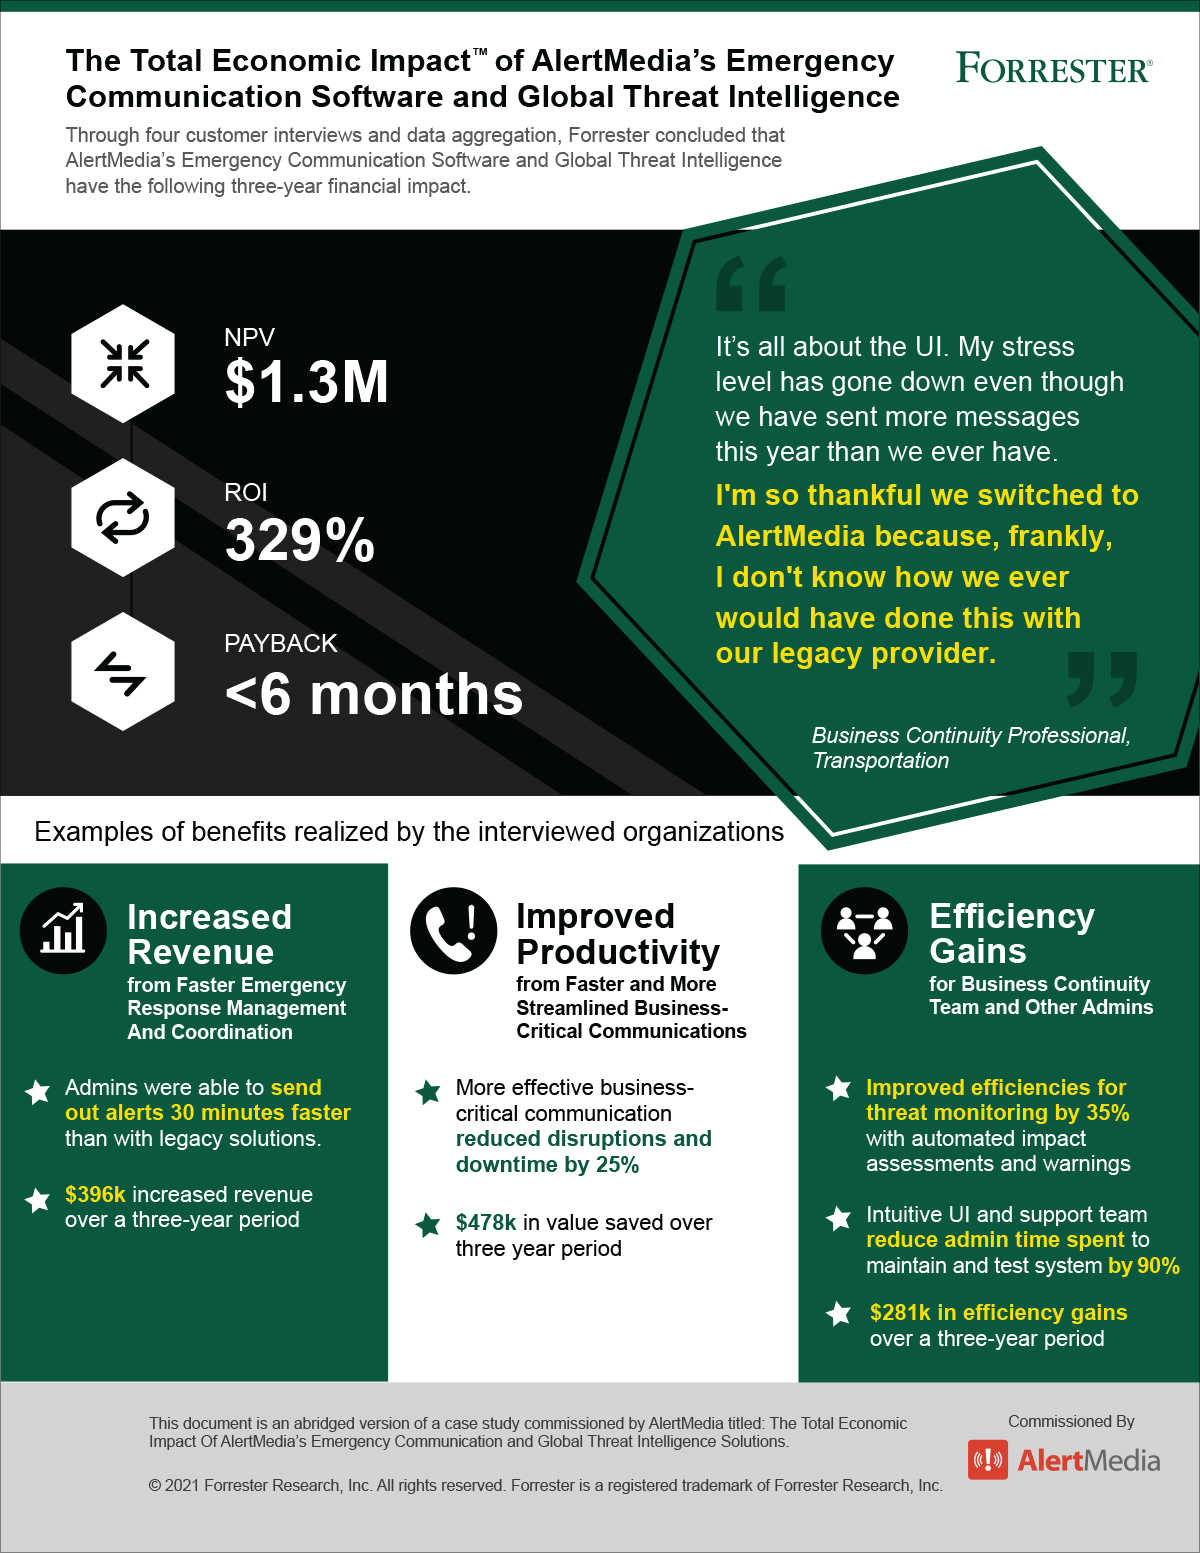 Infographic depicting results of Forrester Total Economic Impact study of AlertMedia